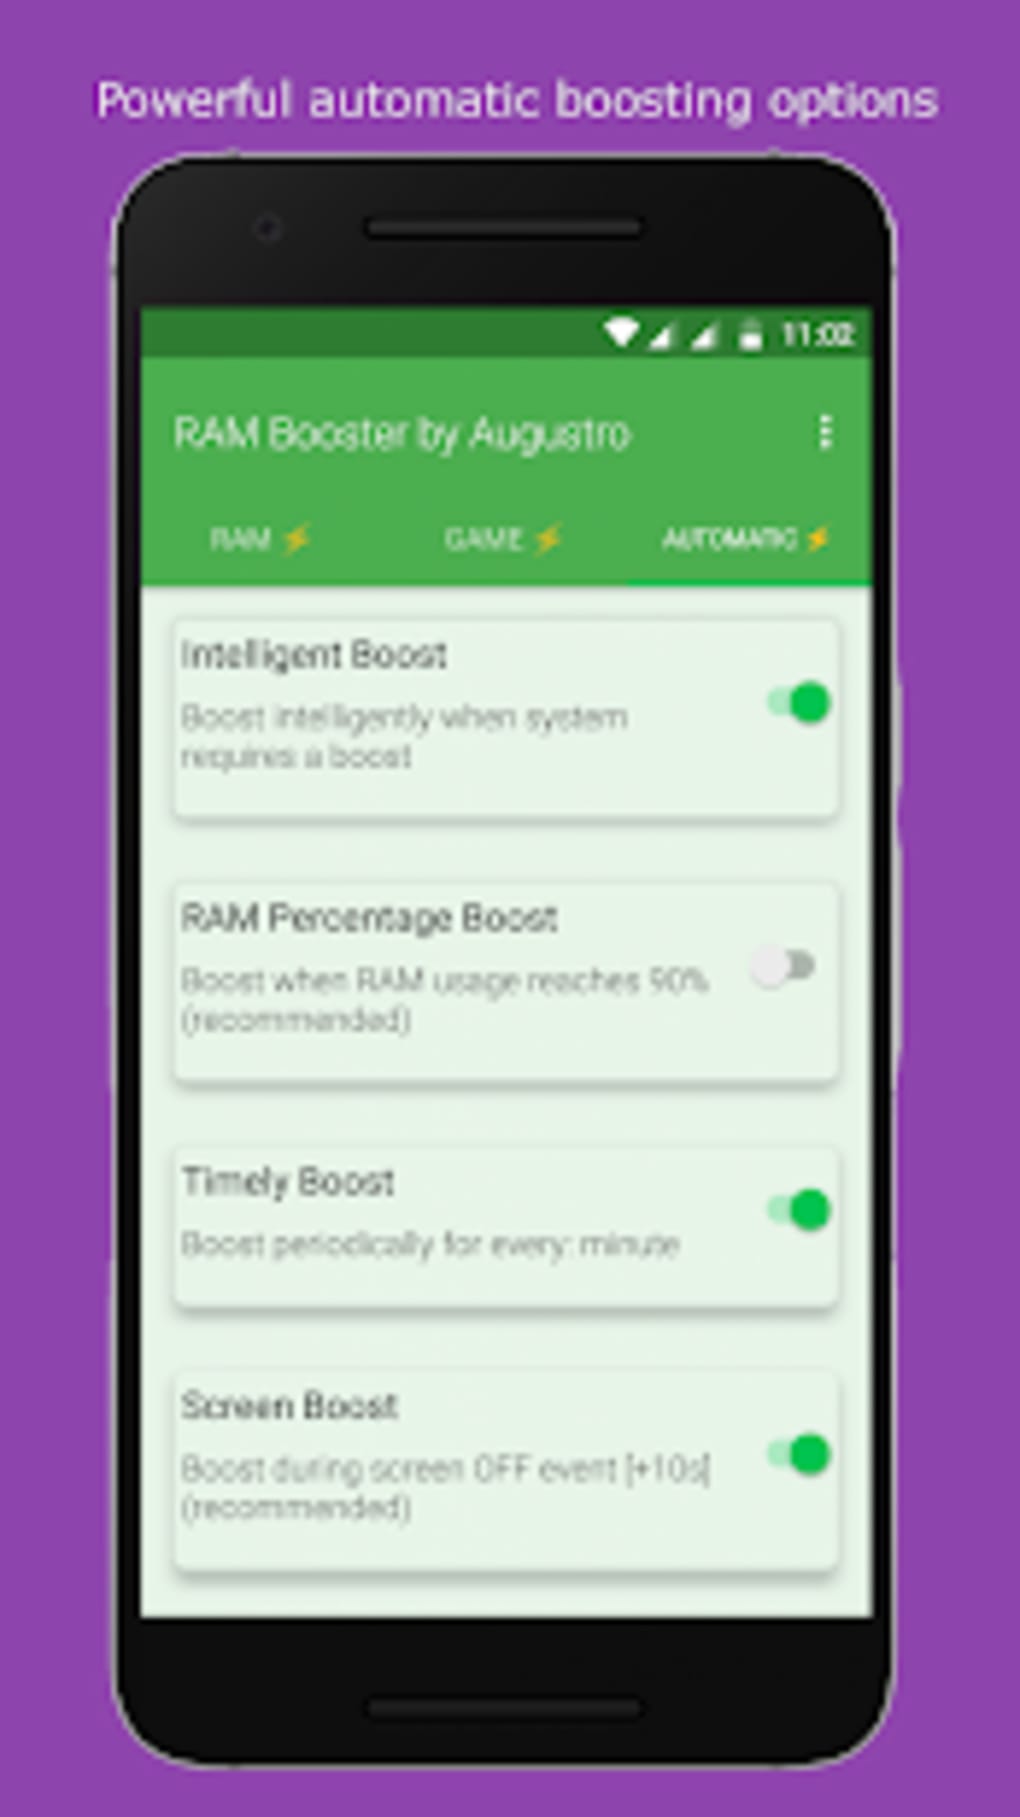 Ram e game booster by augustro apkpure